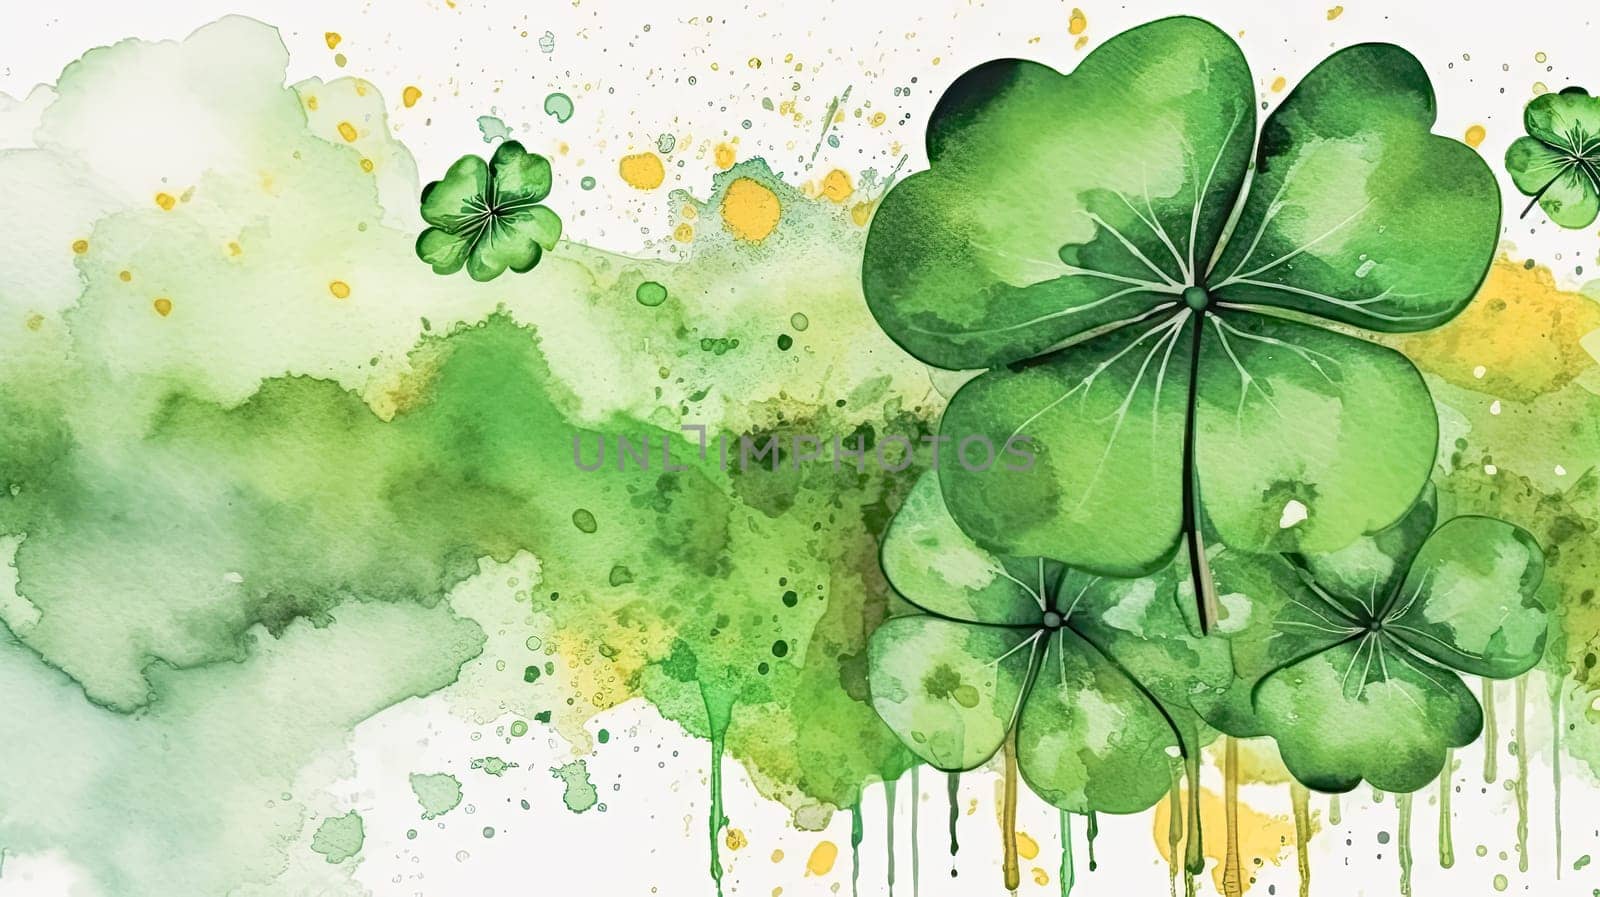 watercolor masterpiece featuring the iconic clover by Alla_Morozova93